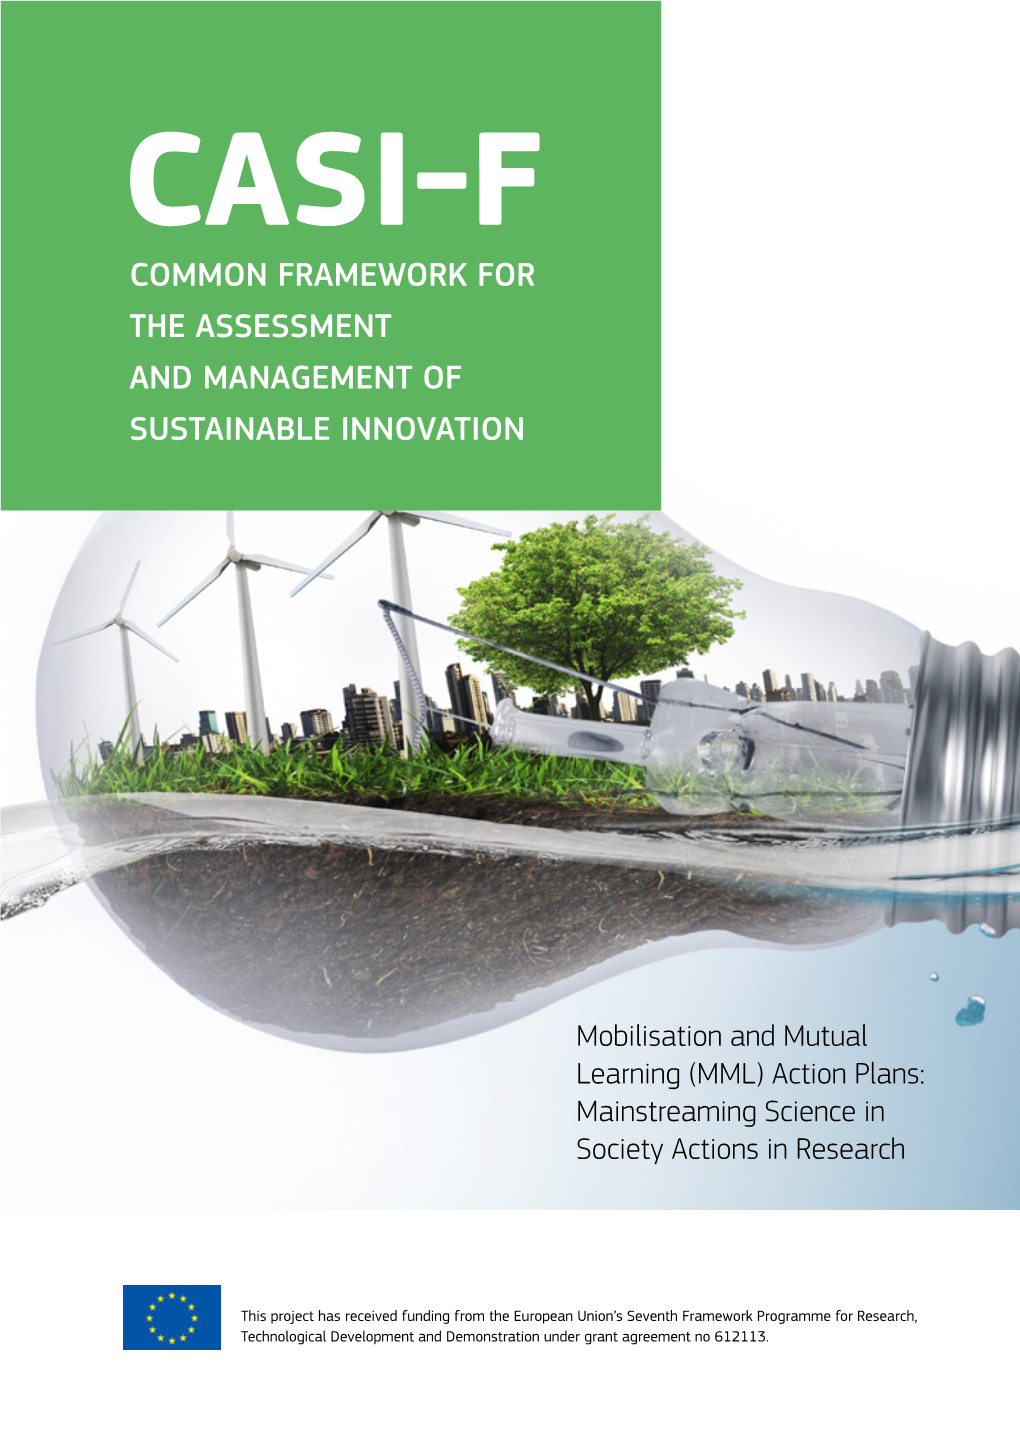 Common Framework for the Assessment and Management of Sustainable Innovation